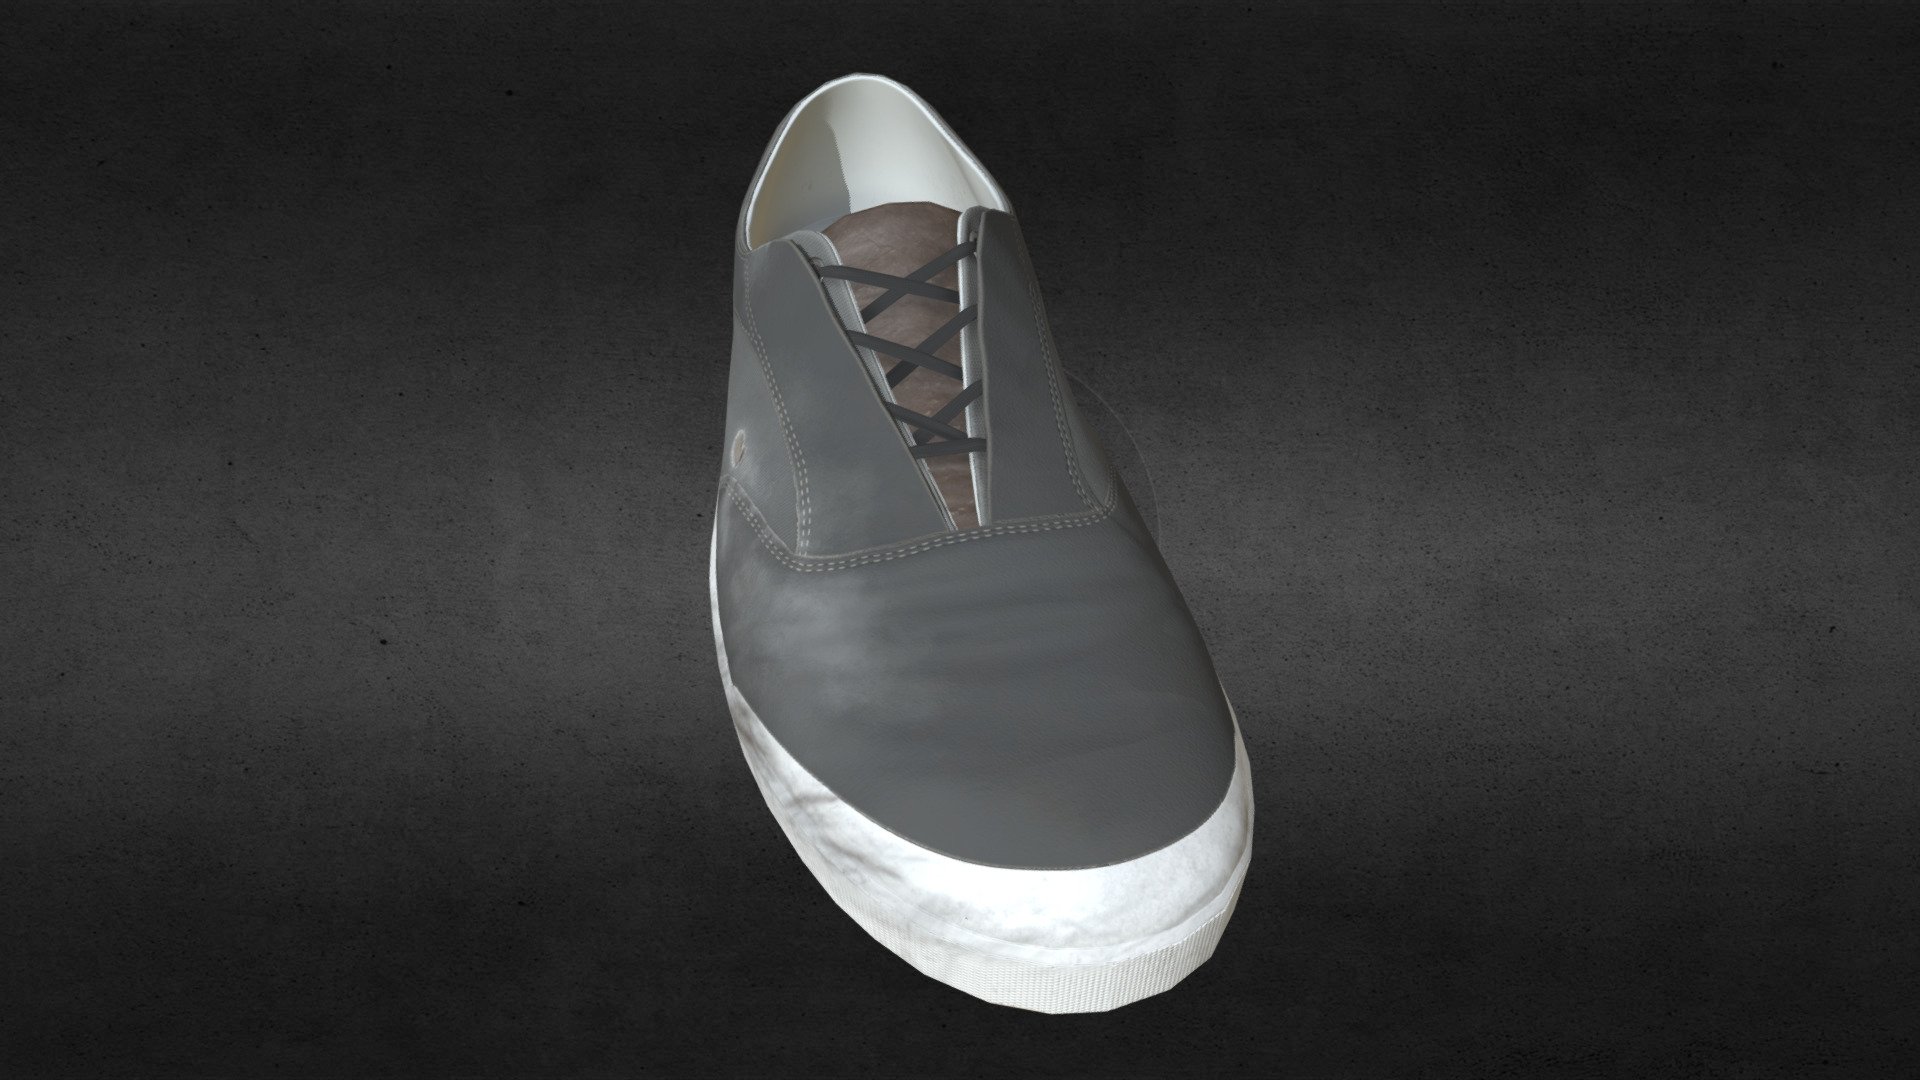 The Ultimate Skate Shoe
Designed by me (Josh Anderson) for maximum durability, without sacrificing style or board feel.
Modelled with 3DS Max, textured with Substance Painter - Shoe Mesh - 3D model by JoshAnderson3D 3d model